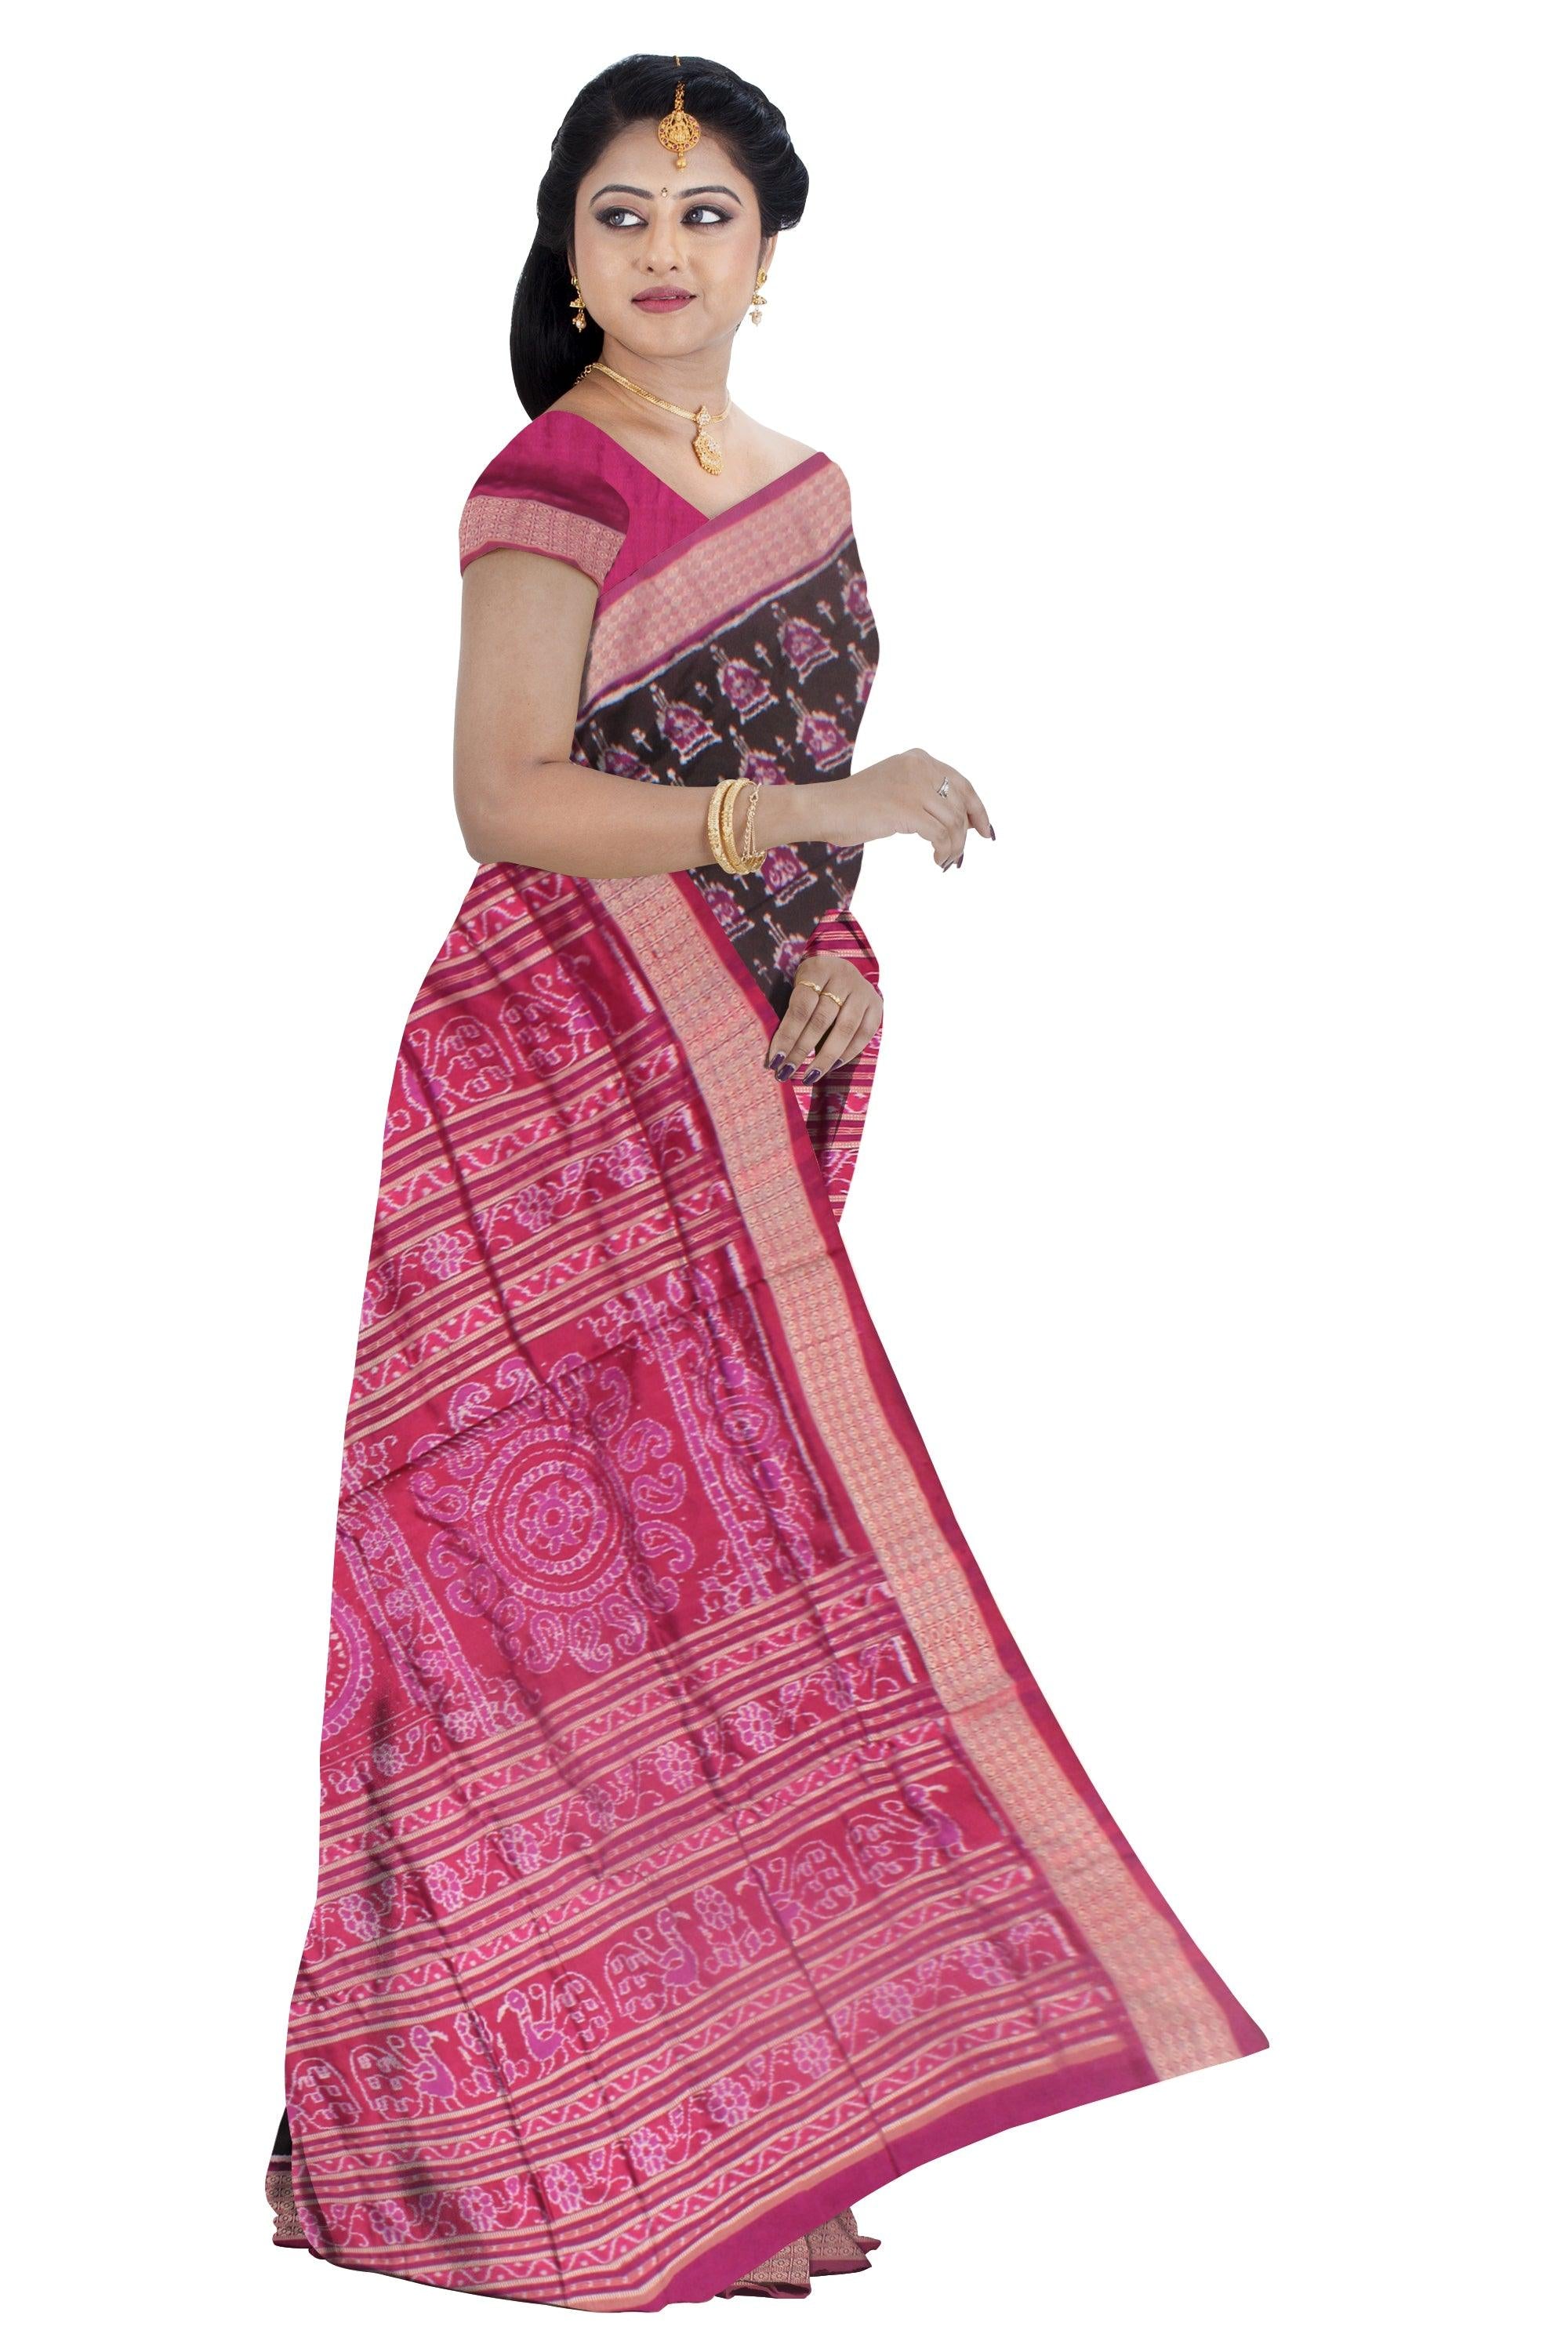 TERRACOTTA AND SMALL  PASAPALI DESIGN PATA SAREE IN ROSE AND BURGUNDY COLOR, ATTACHED WITH BLOUSE PIECE. - Koshali Arts & Crafts Enterprise